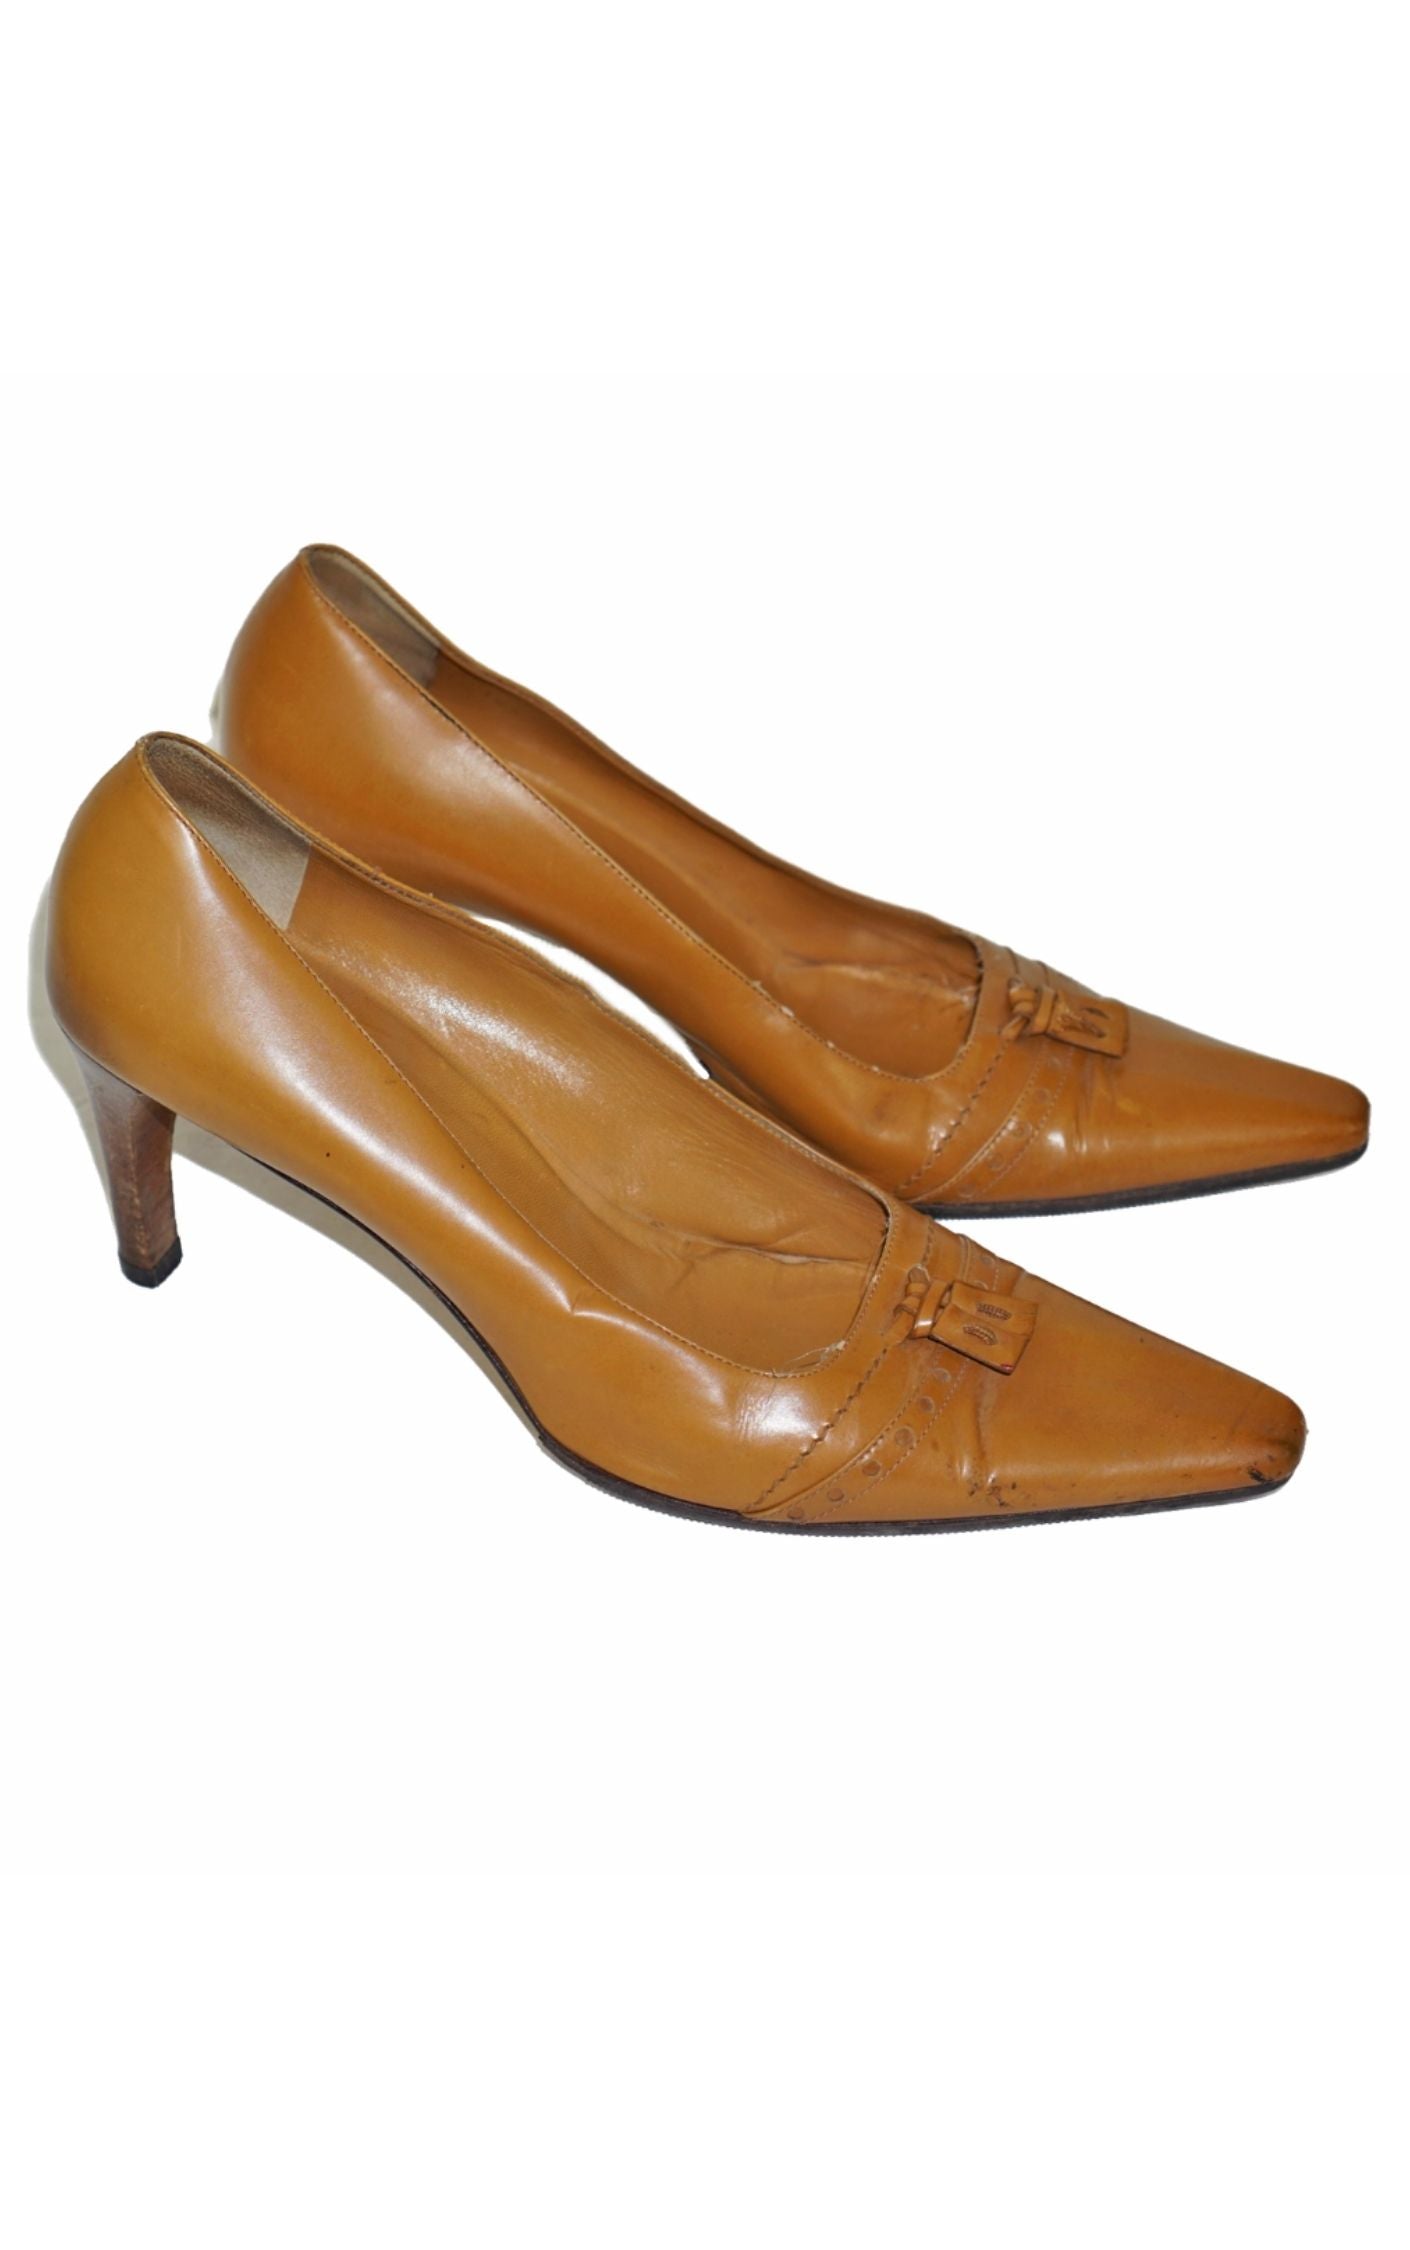 GUCCI Vintage Brown Leather Pointed Toe Pumps RESELLUM